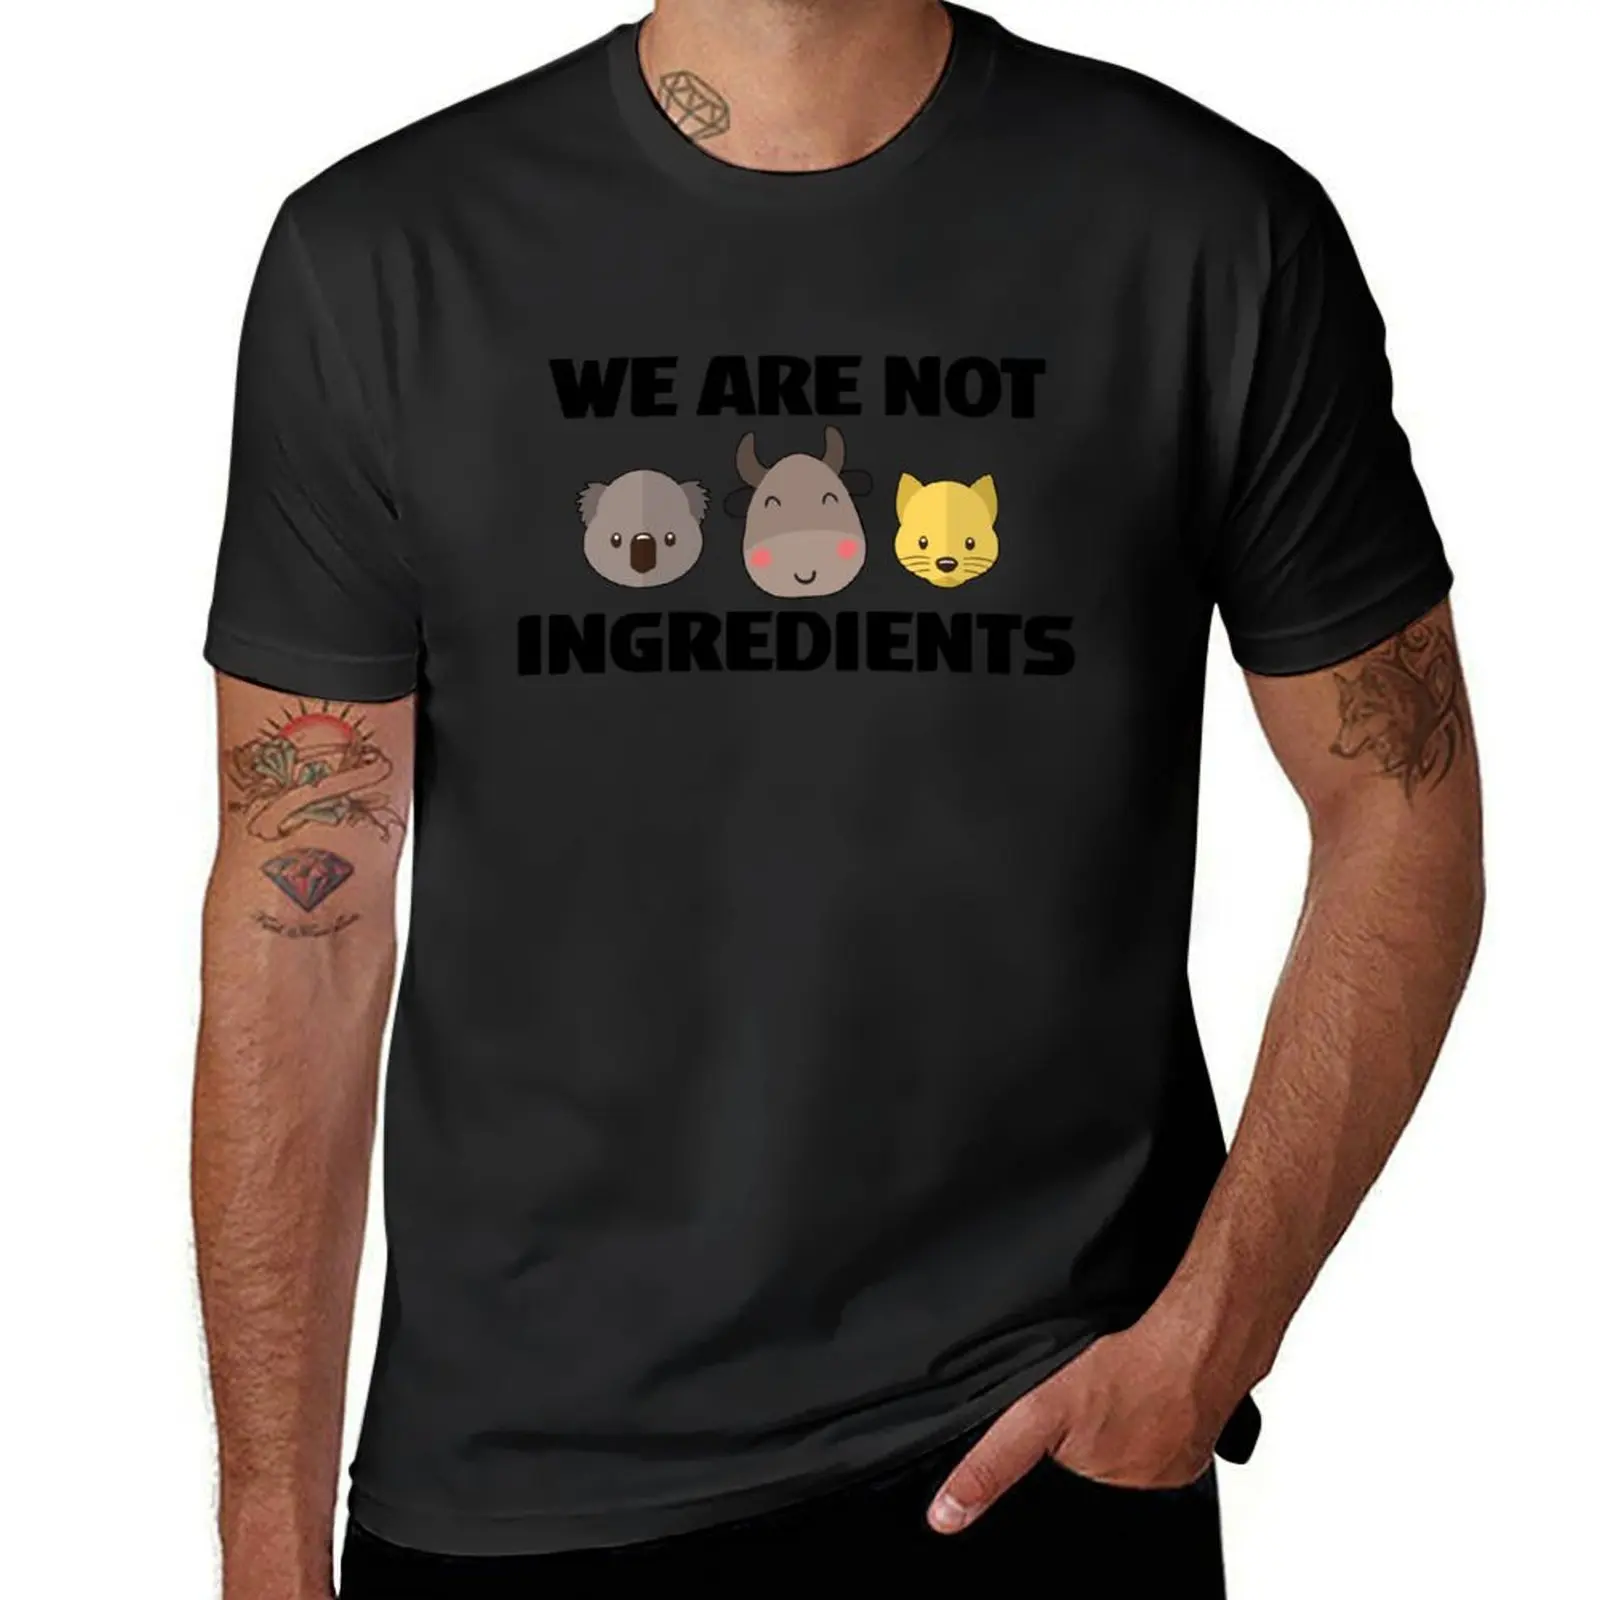 

we are not ingredients - Funny Vegan Quote T-shirt boys animal print customs oversized t shirts for men